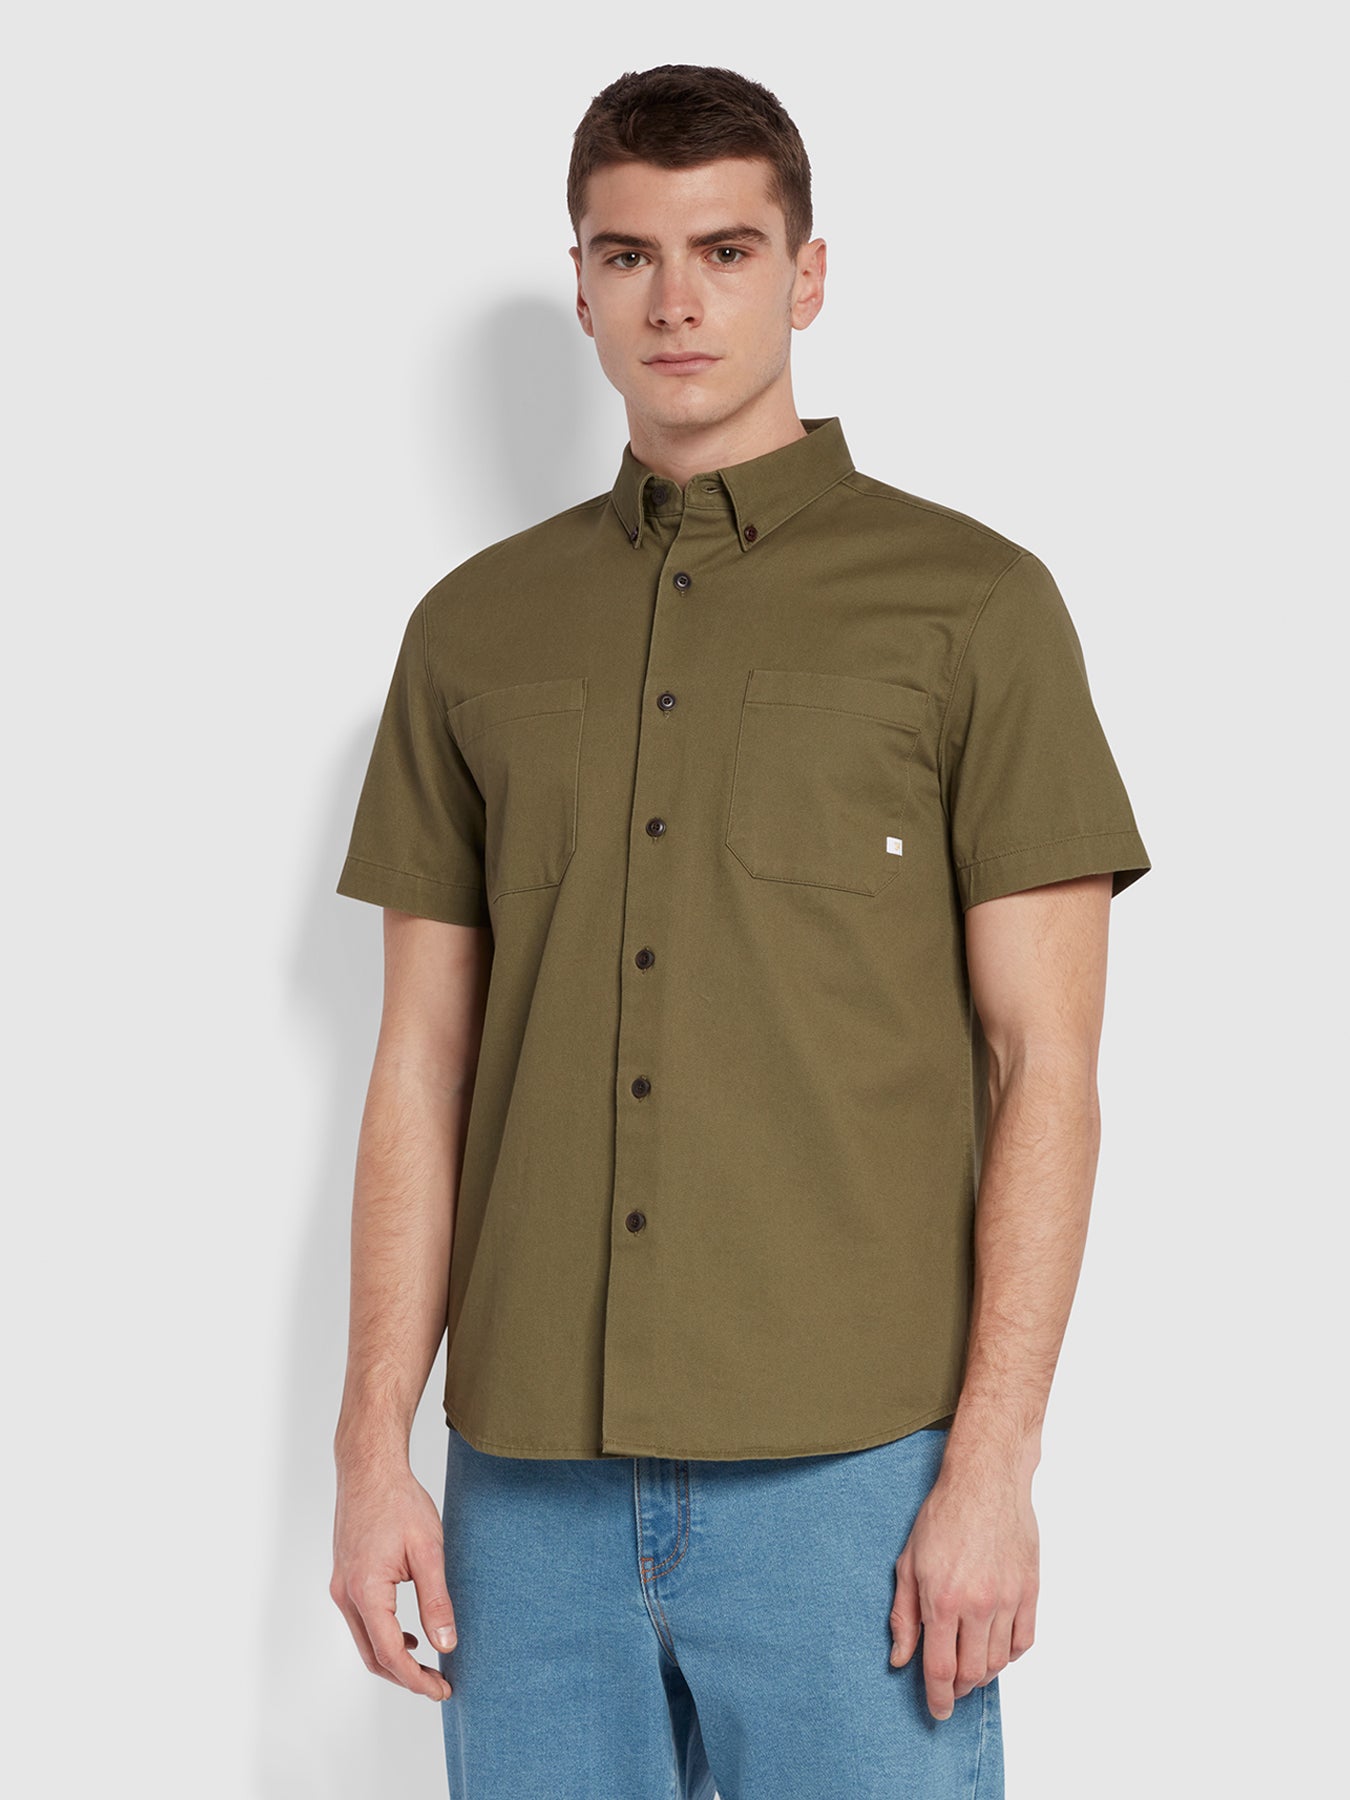 View Merrick Casual Fit Short Sleeve Twill Shirt In Vintage Green information